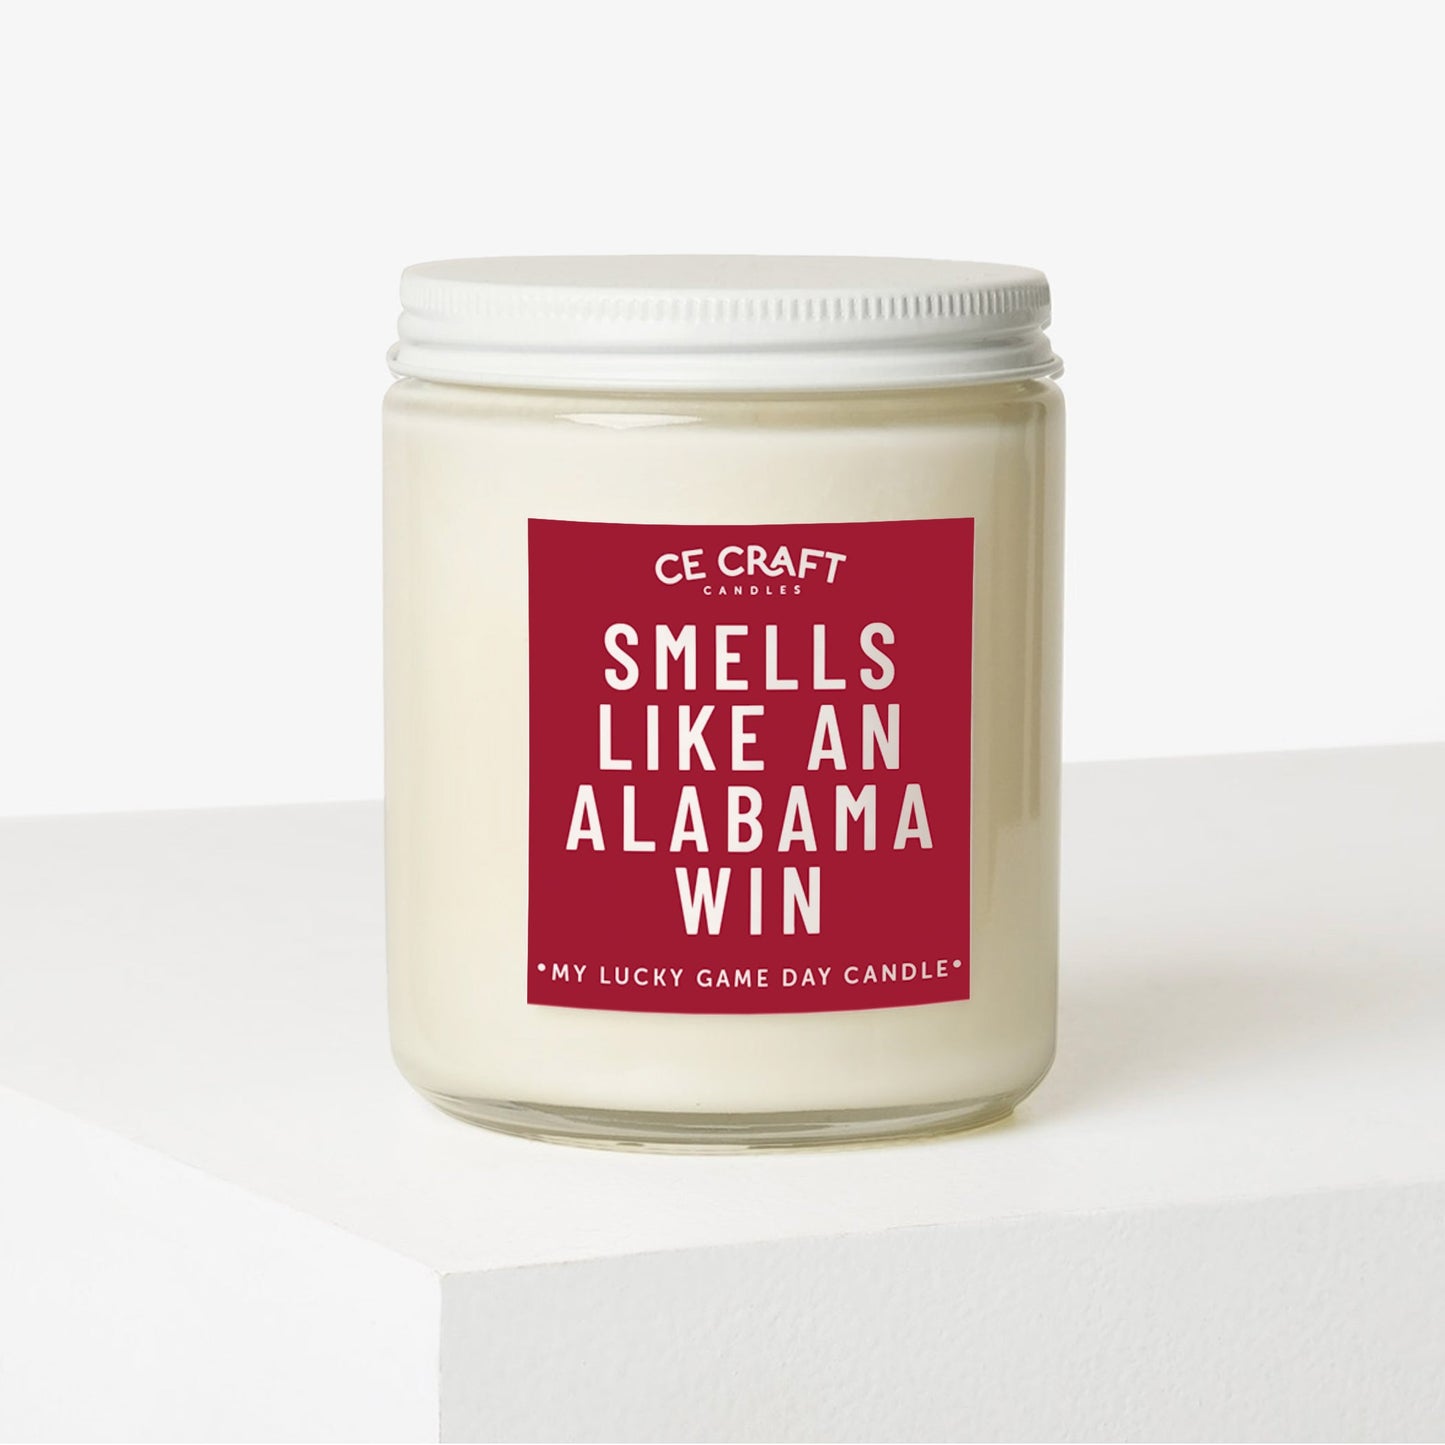 Smells Like An Alabama Win Scented Candle Candles CE Craft 